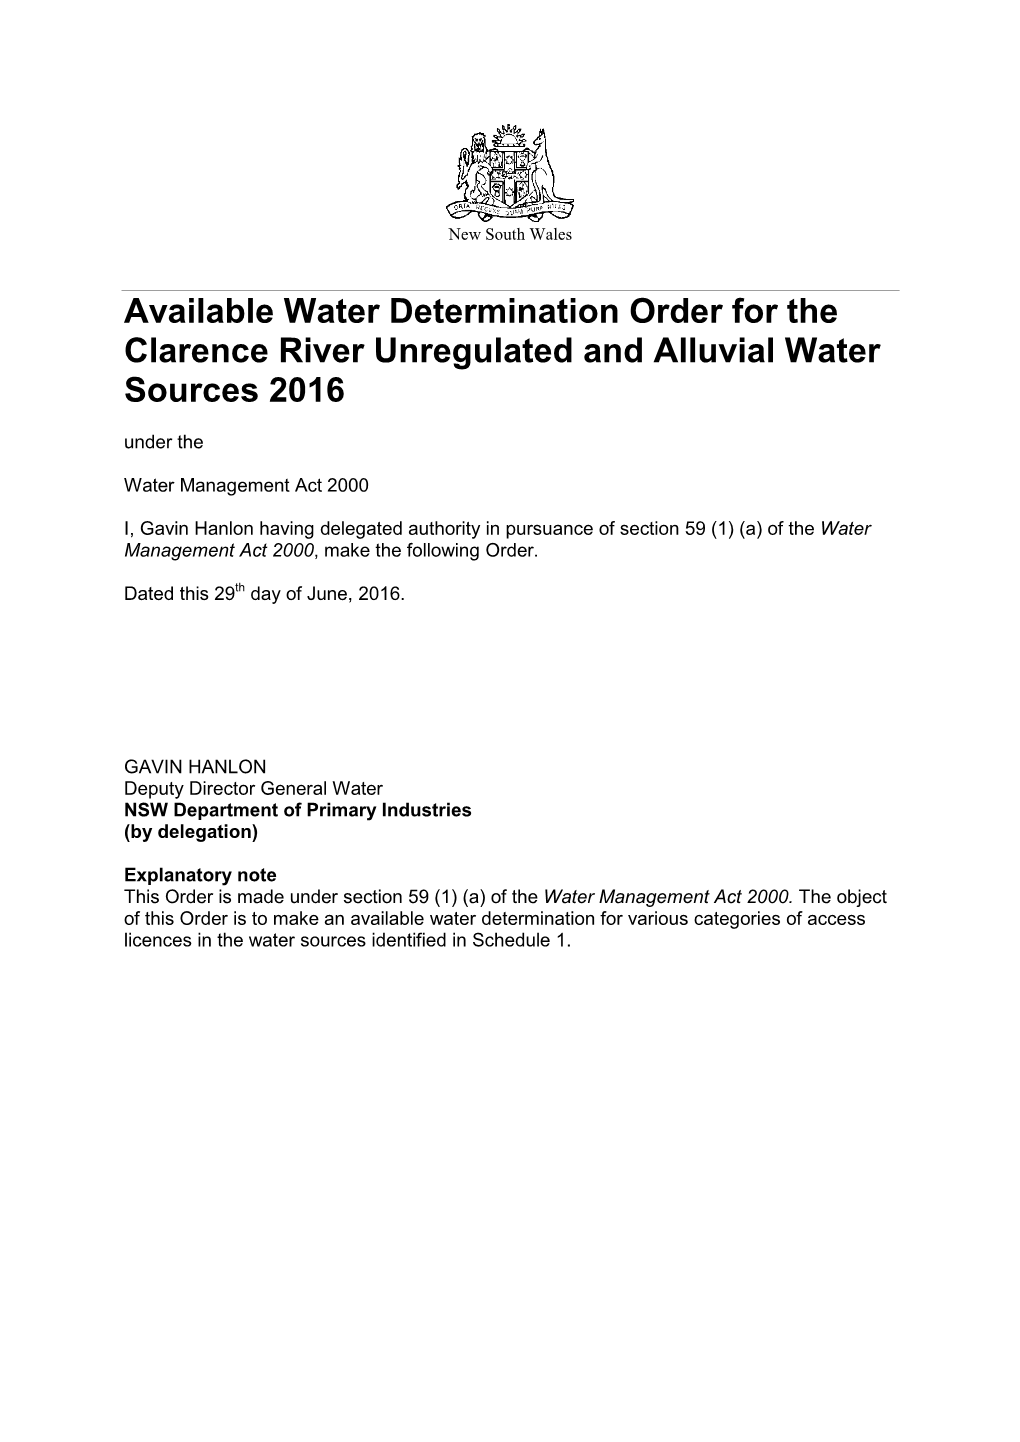 Available Water Determination Order for the Clarence River Unregulated and Alluvial Water Sources 2016